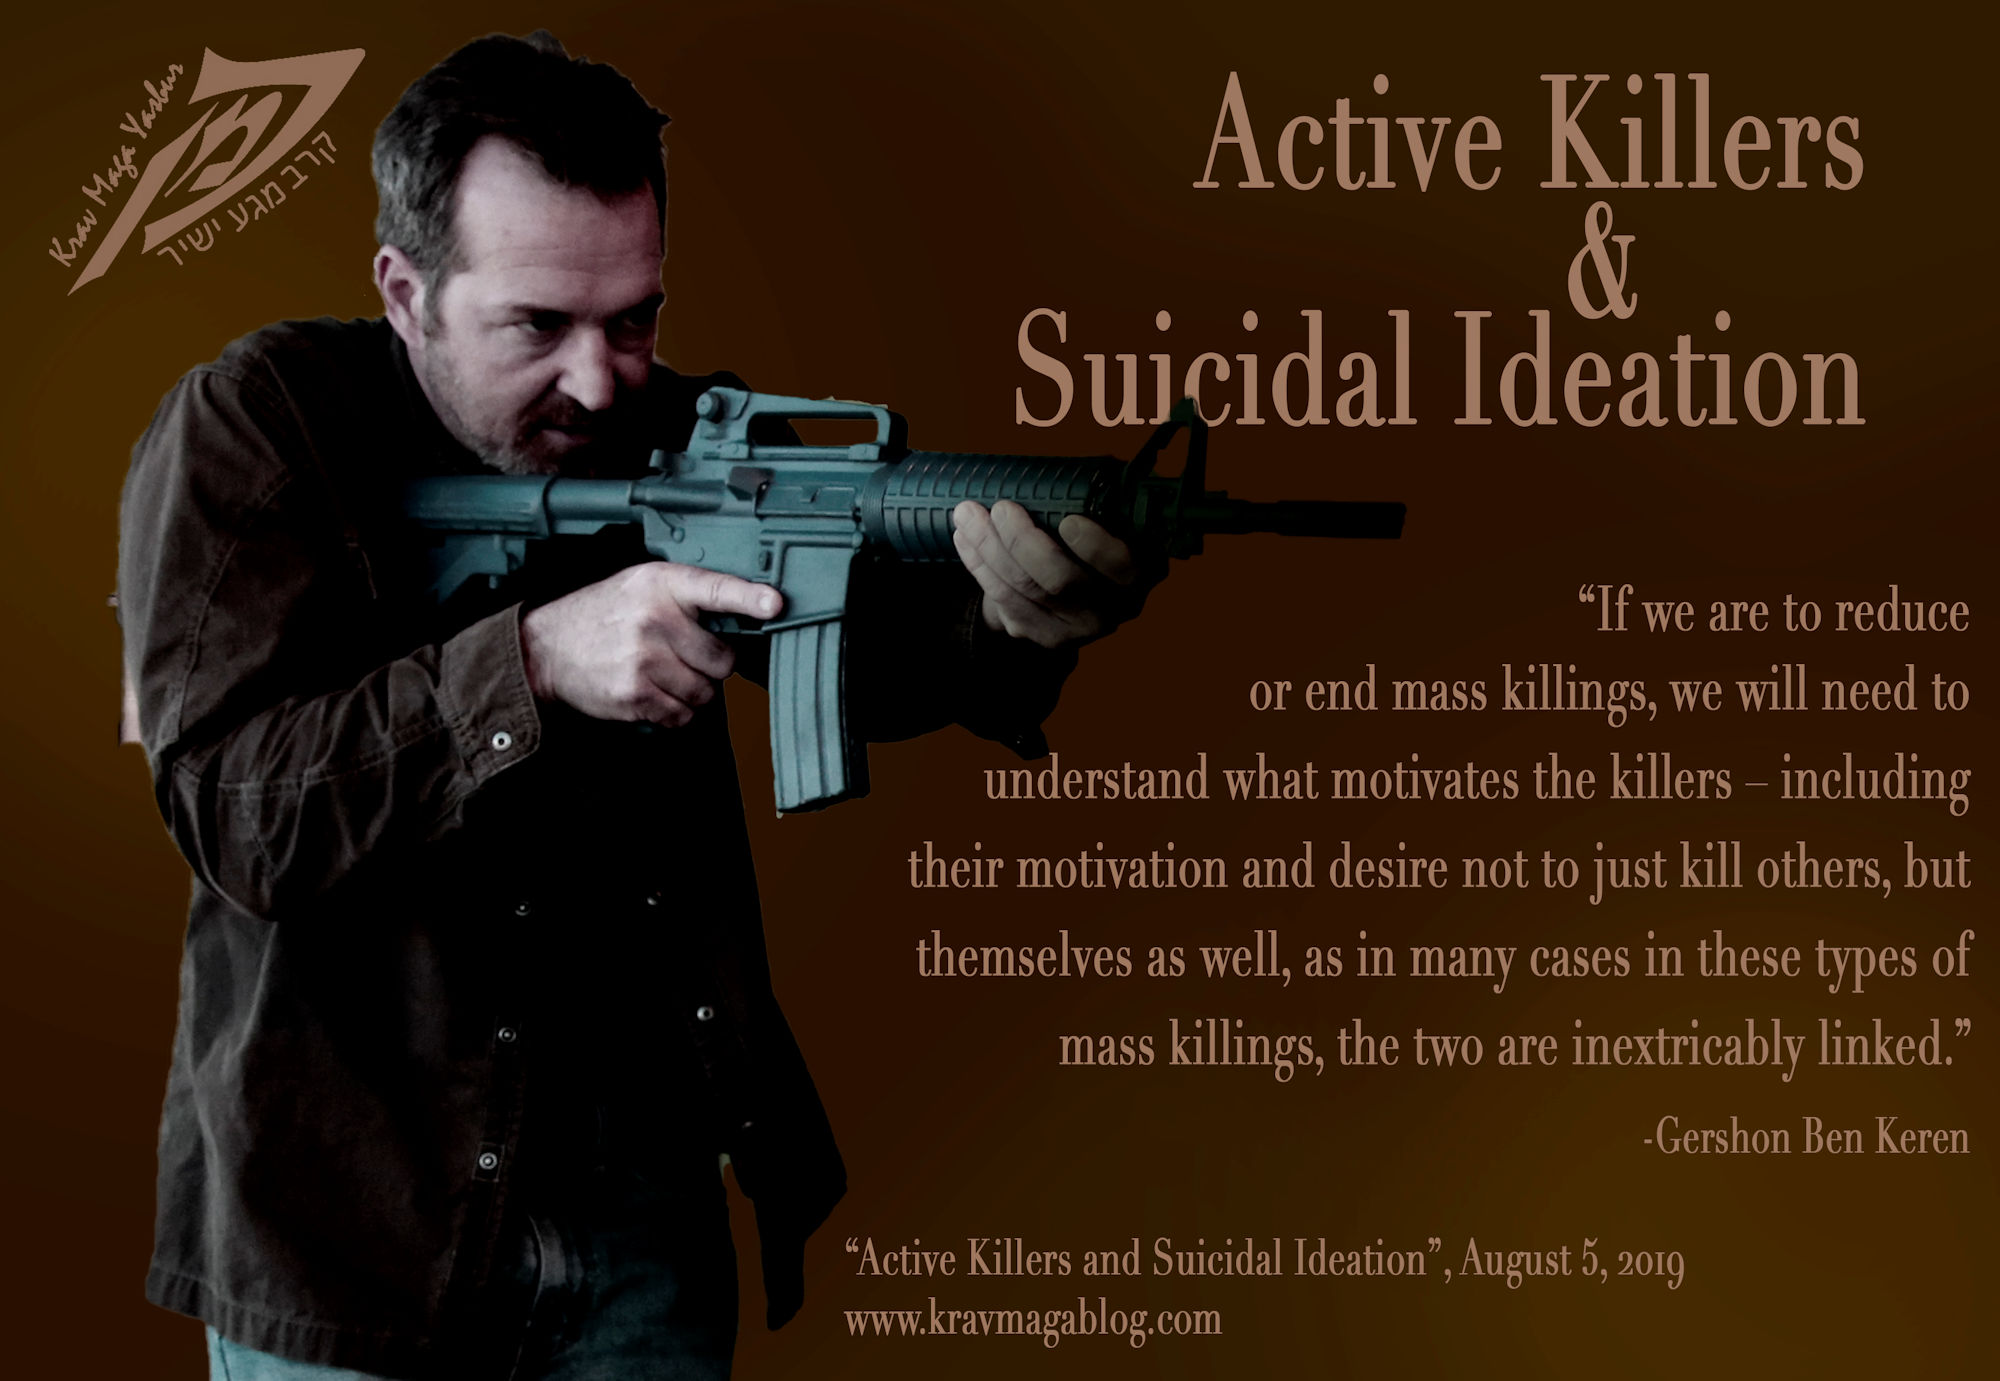 Blog About Active Killers & Suicidal Ideation